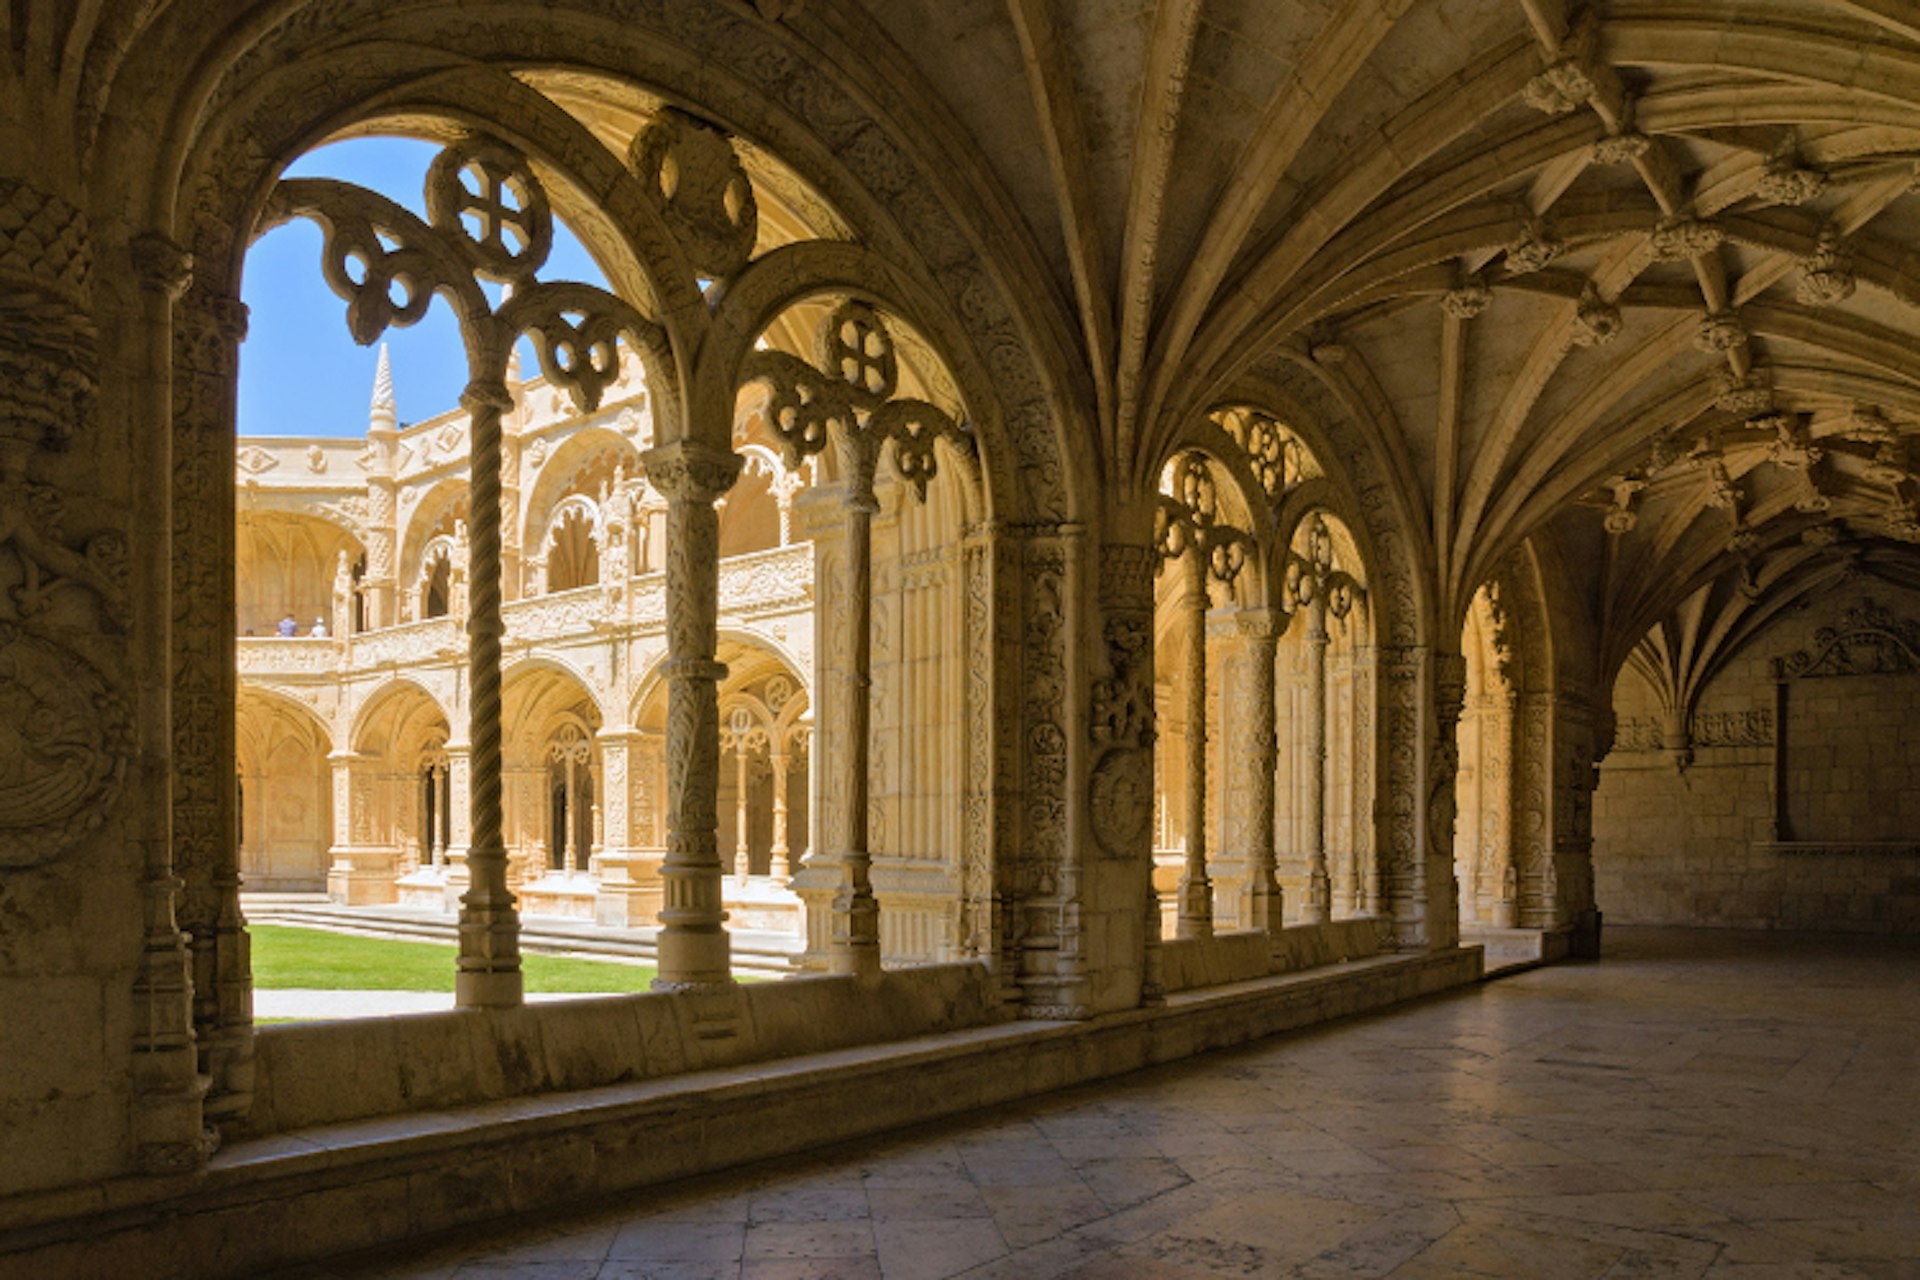 Cloister Vaulted Gallery in Mosteiro dos Jerónimos. Image by Dmitry Shakin / Getty images